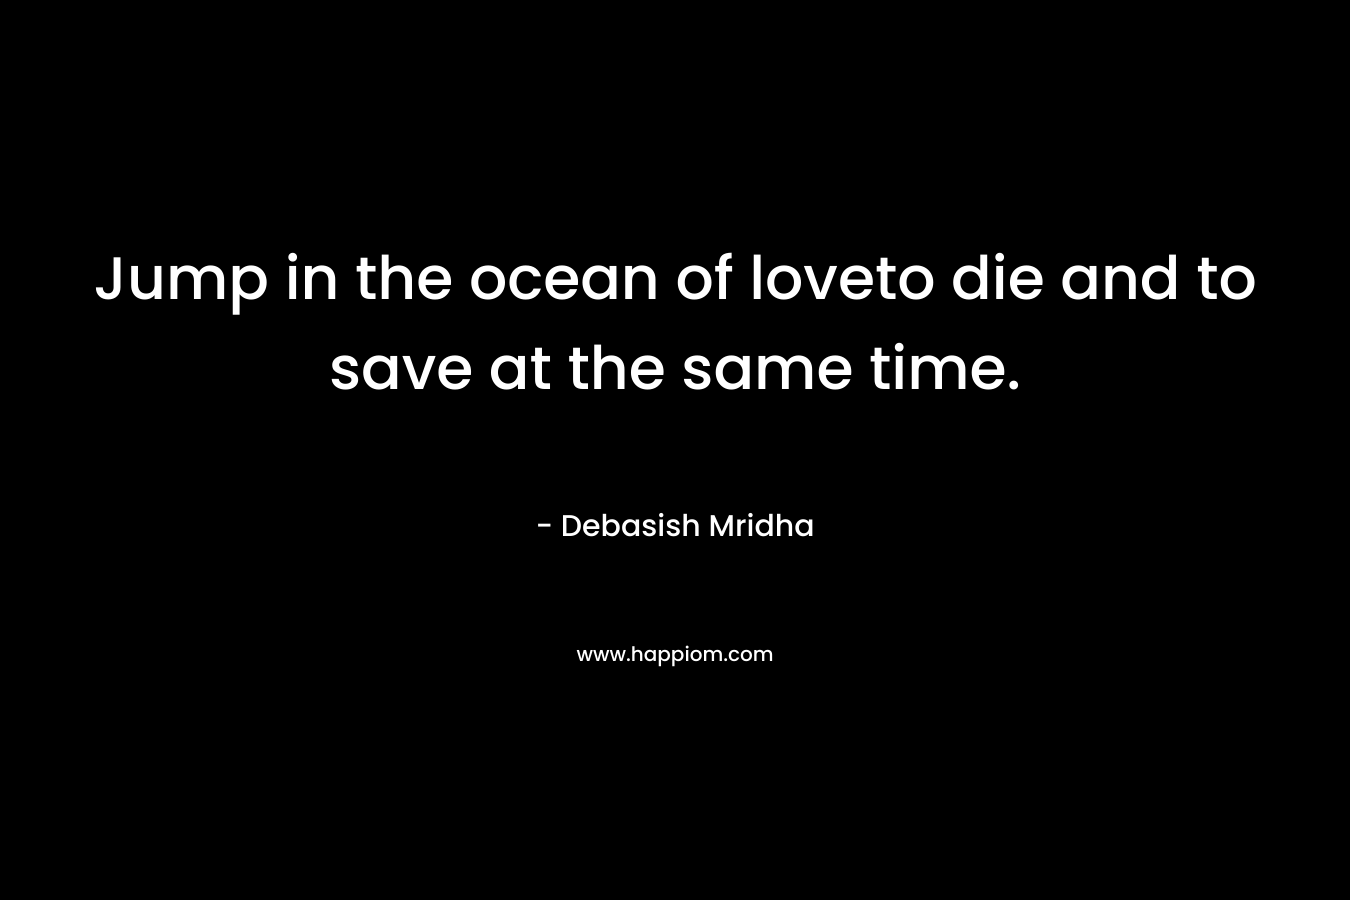 Jump in the ocean of loveto die and to save at the same time. – Debasish Mridha